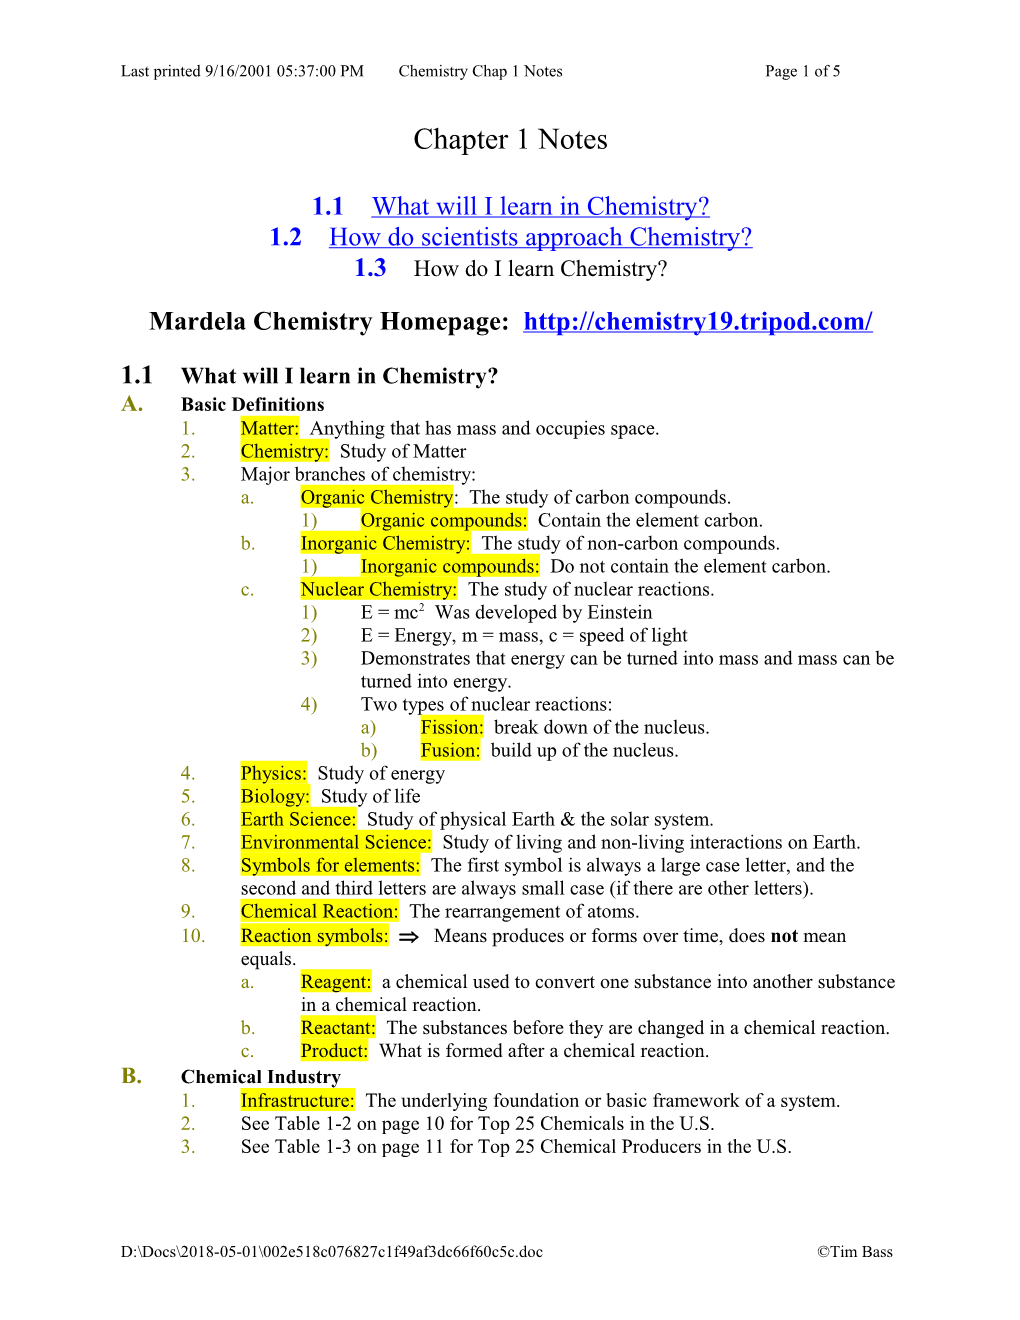 Last Printed 9/16/2001 5:37 PM Chemistry Chap 1 Notes Page 1 of 5